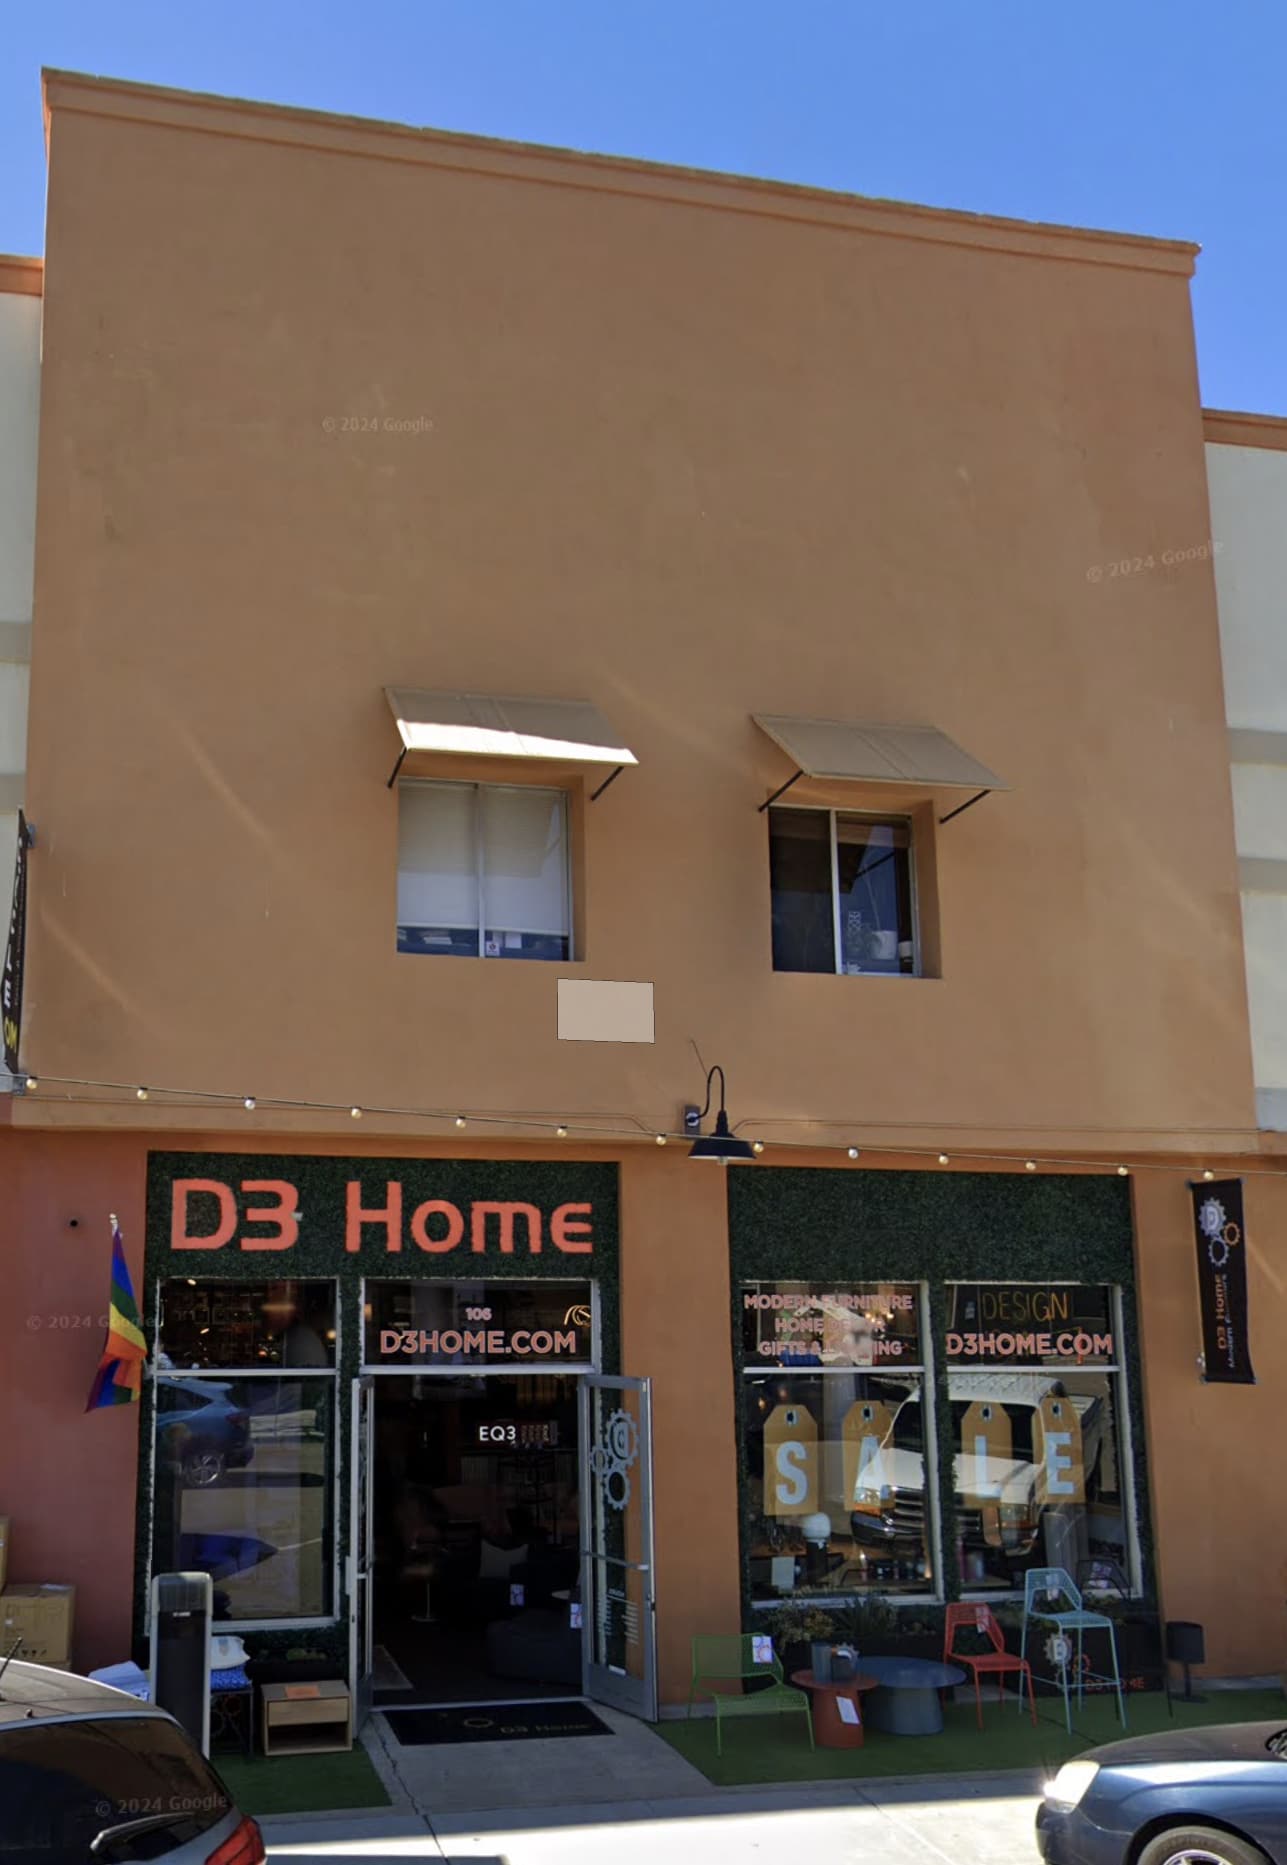 D3 Home Modern Furniture in Little Italy storefront photo of tan two-story building.